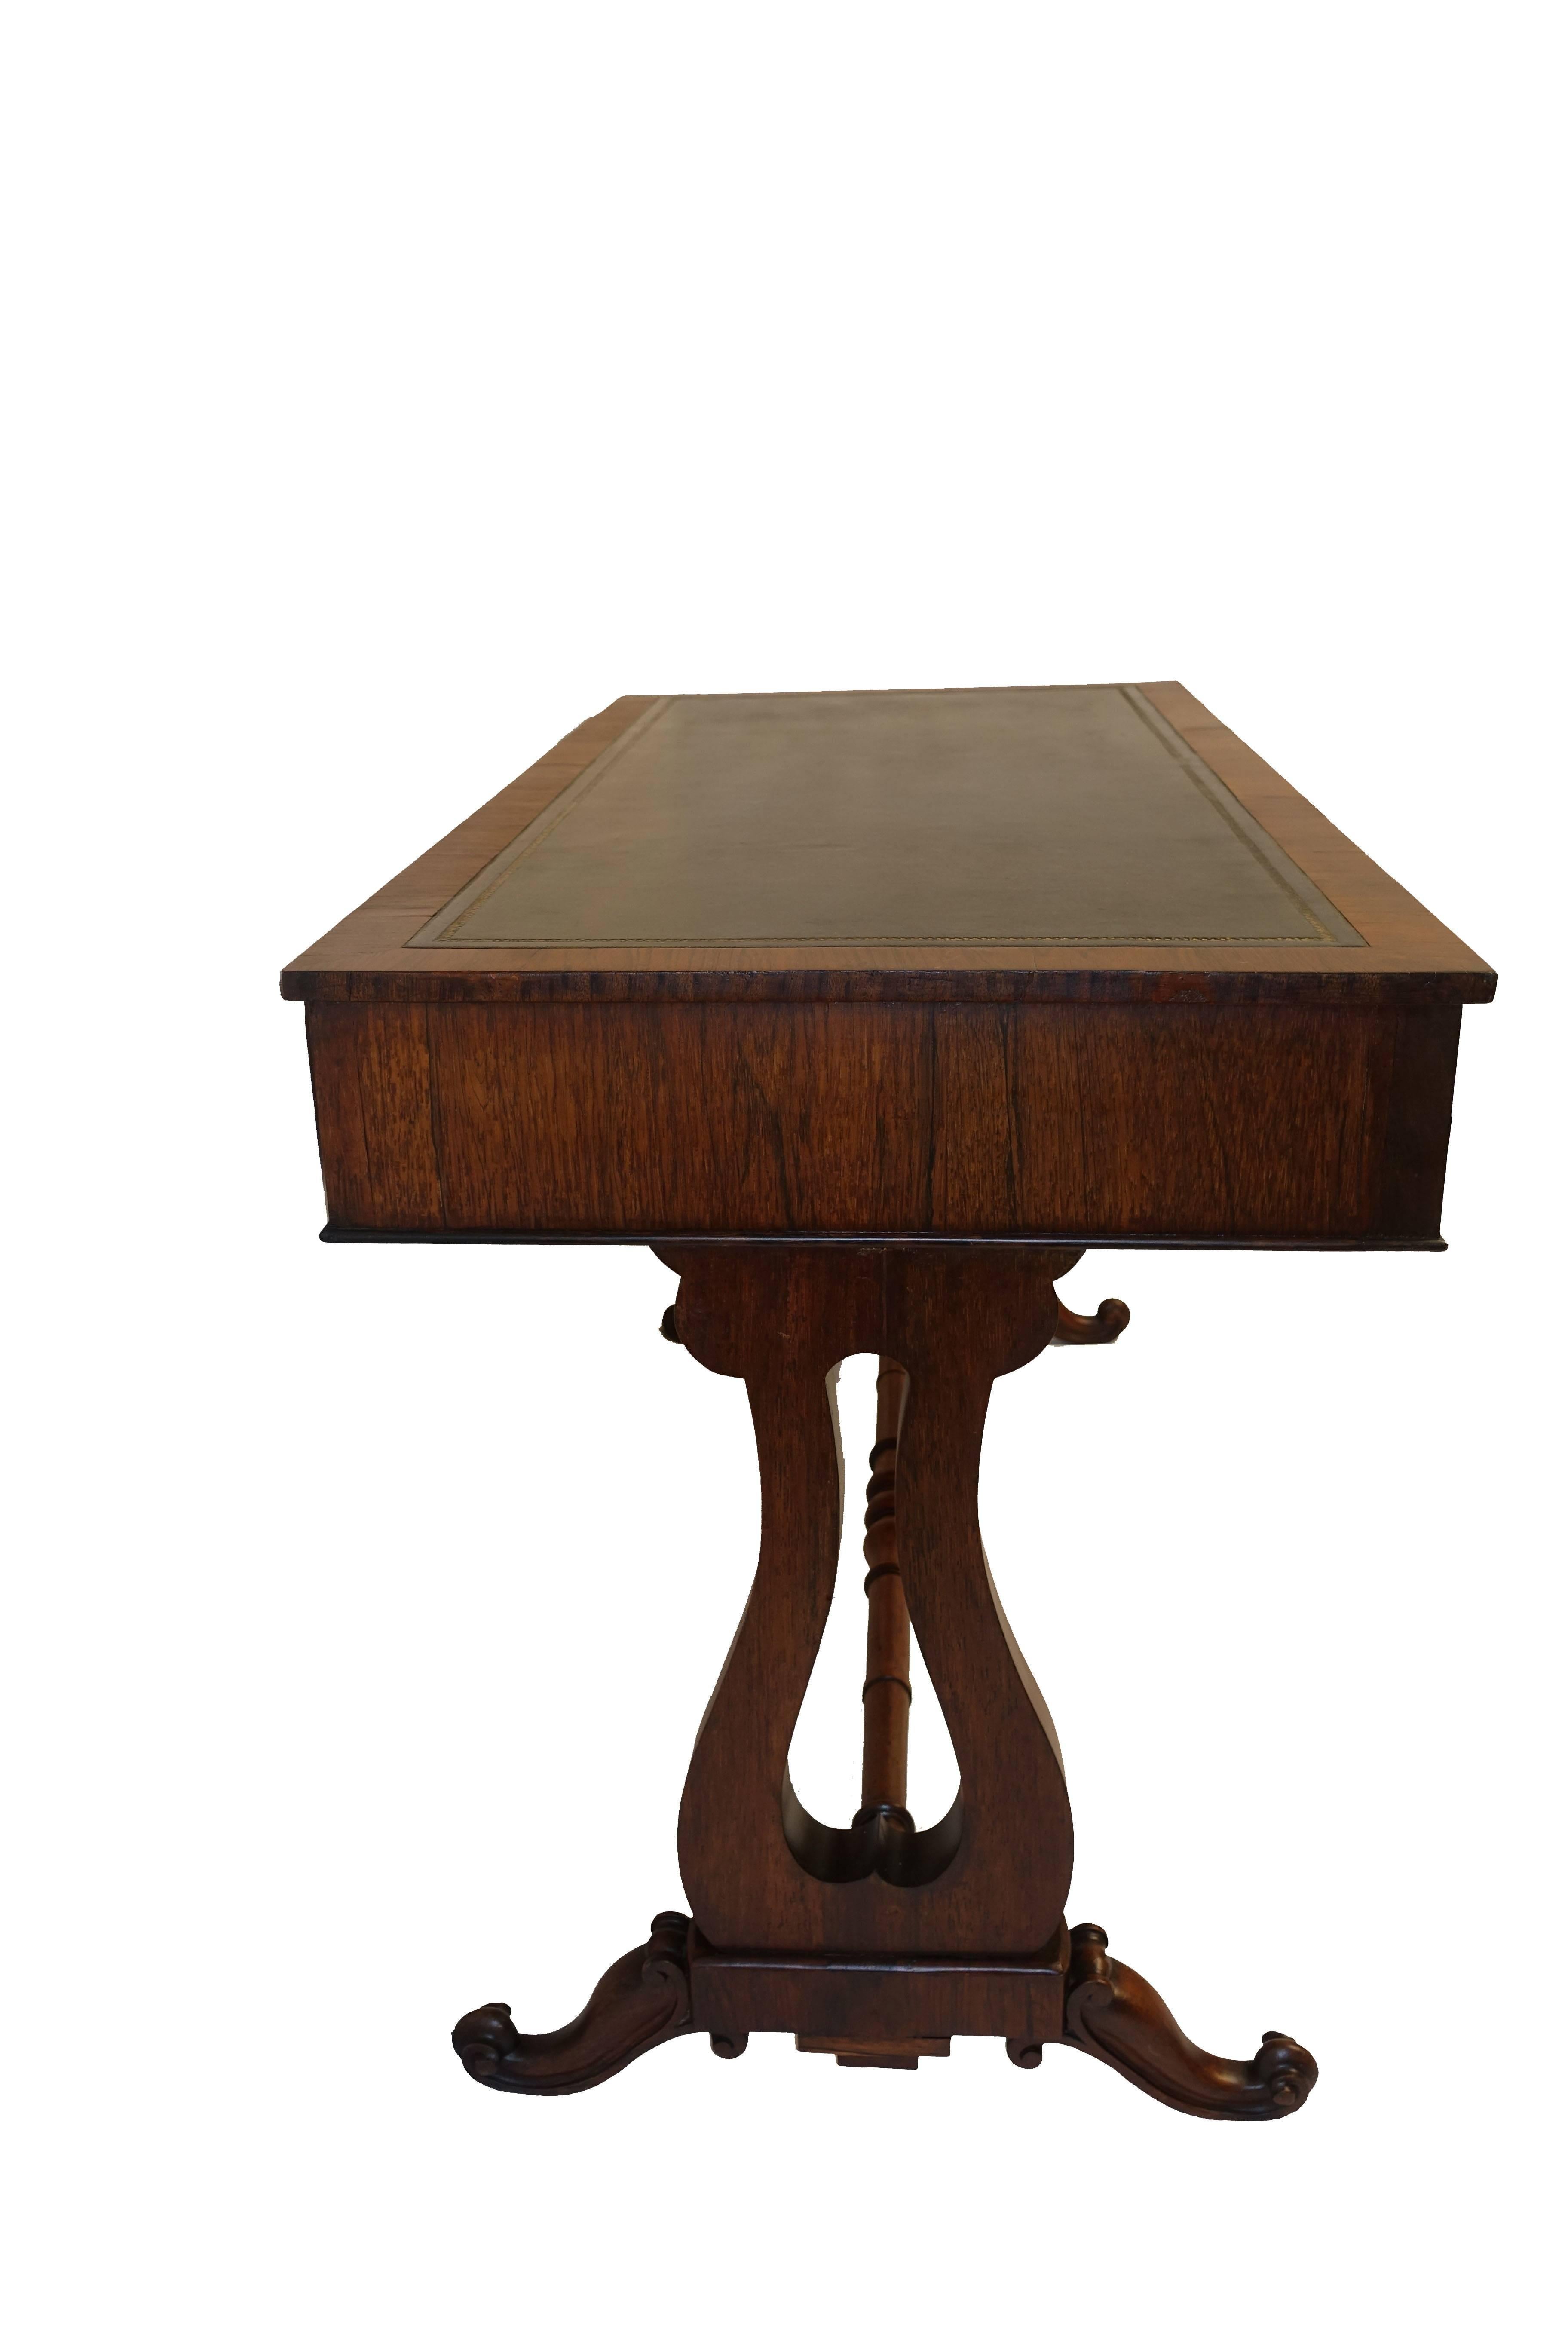 Leather Regency Rosewood Sofa Table or Gentleman's Desk, English 19th Century